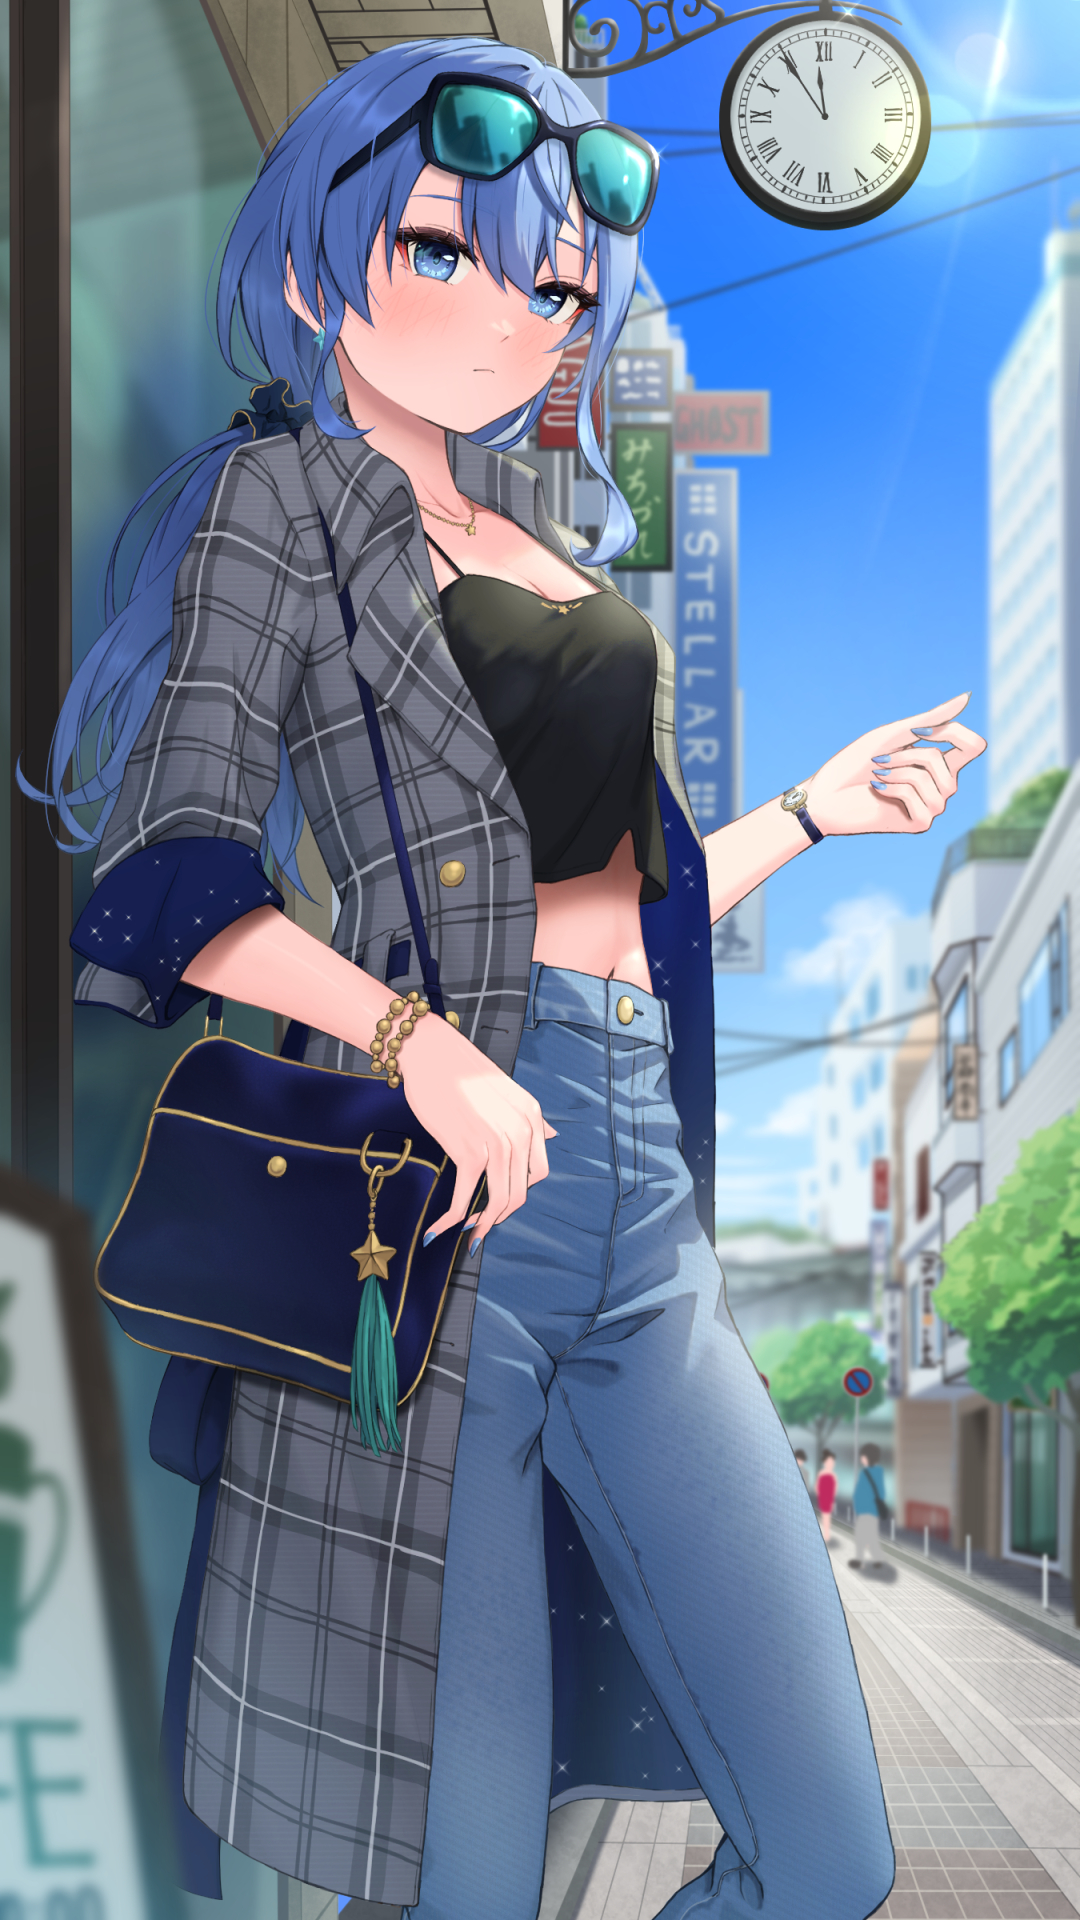 Anime 1080x1920 anime anime girls digital art artwork 2D Pixiv petite belly belly button bare midriff looking at viewer portrait display purse sky building blue hair blue eyes sunglasses clocks standing sunlight Hoshimachi Suisei Hololive